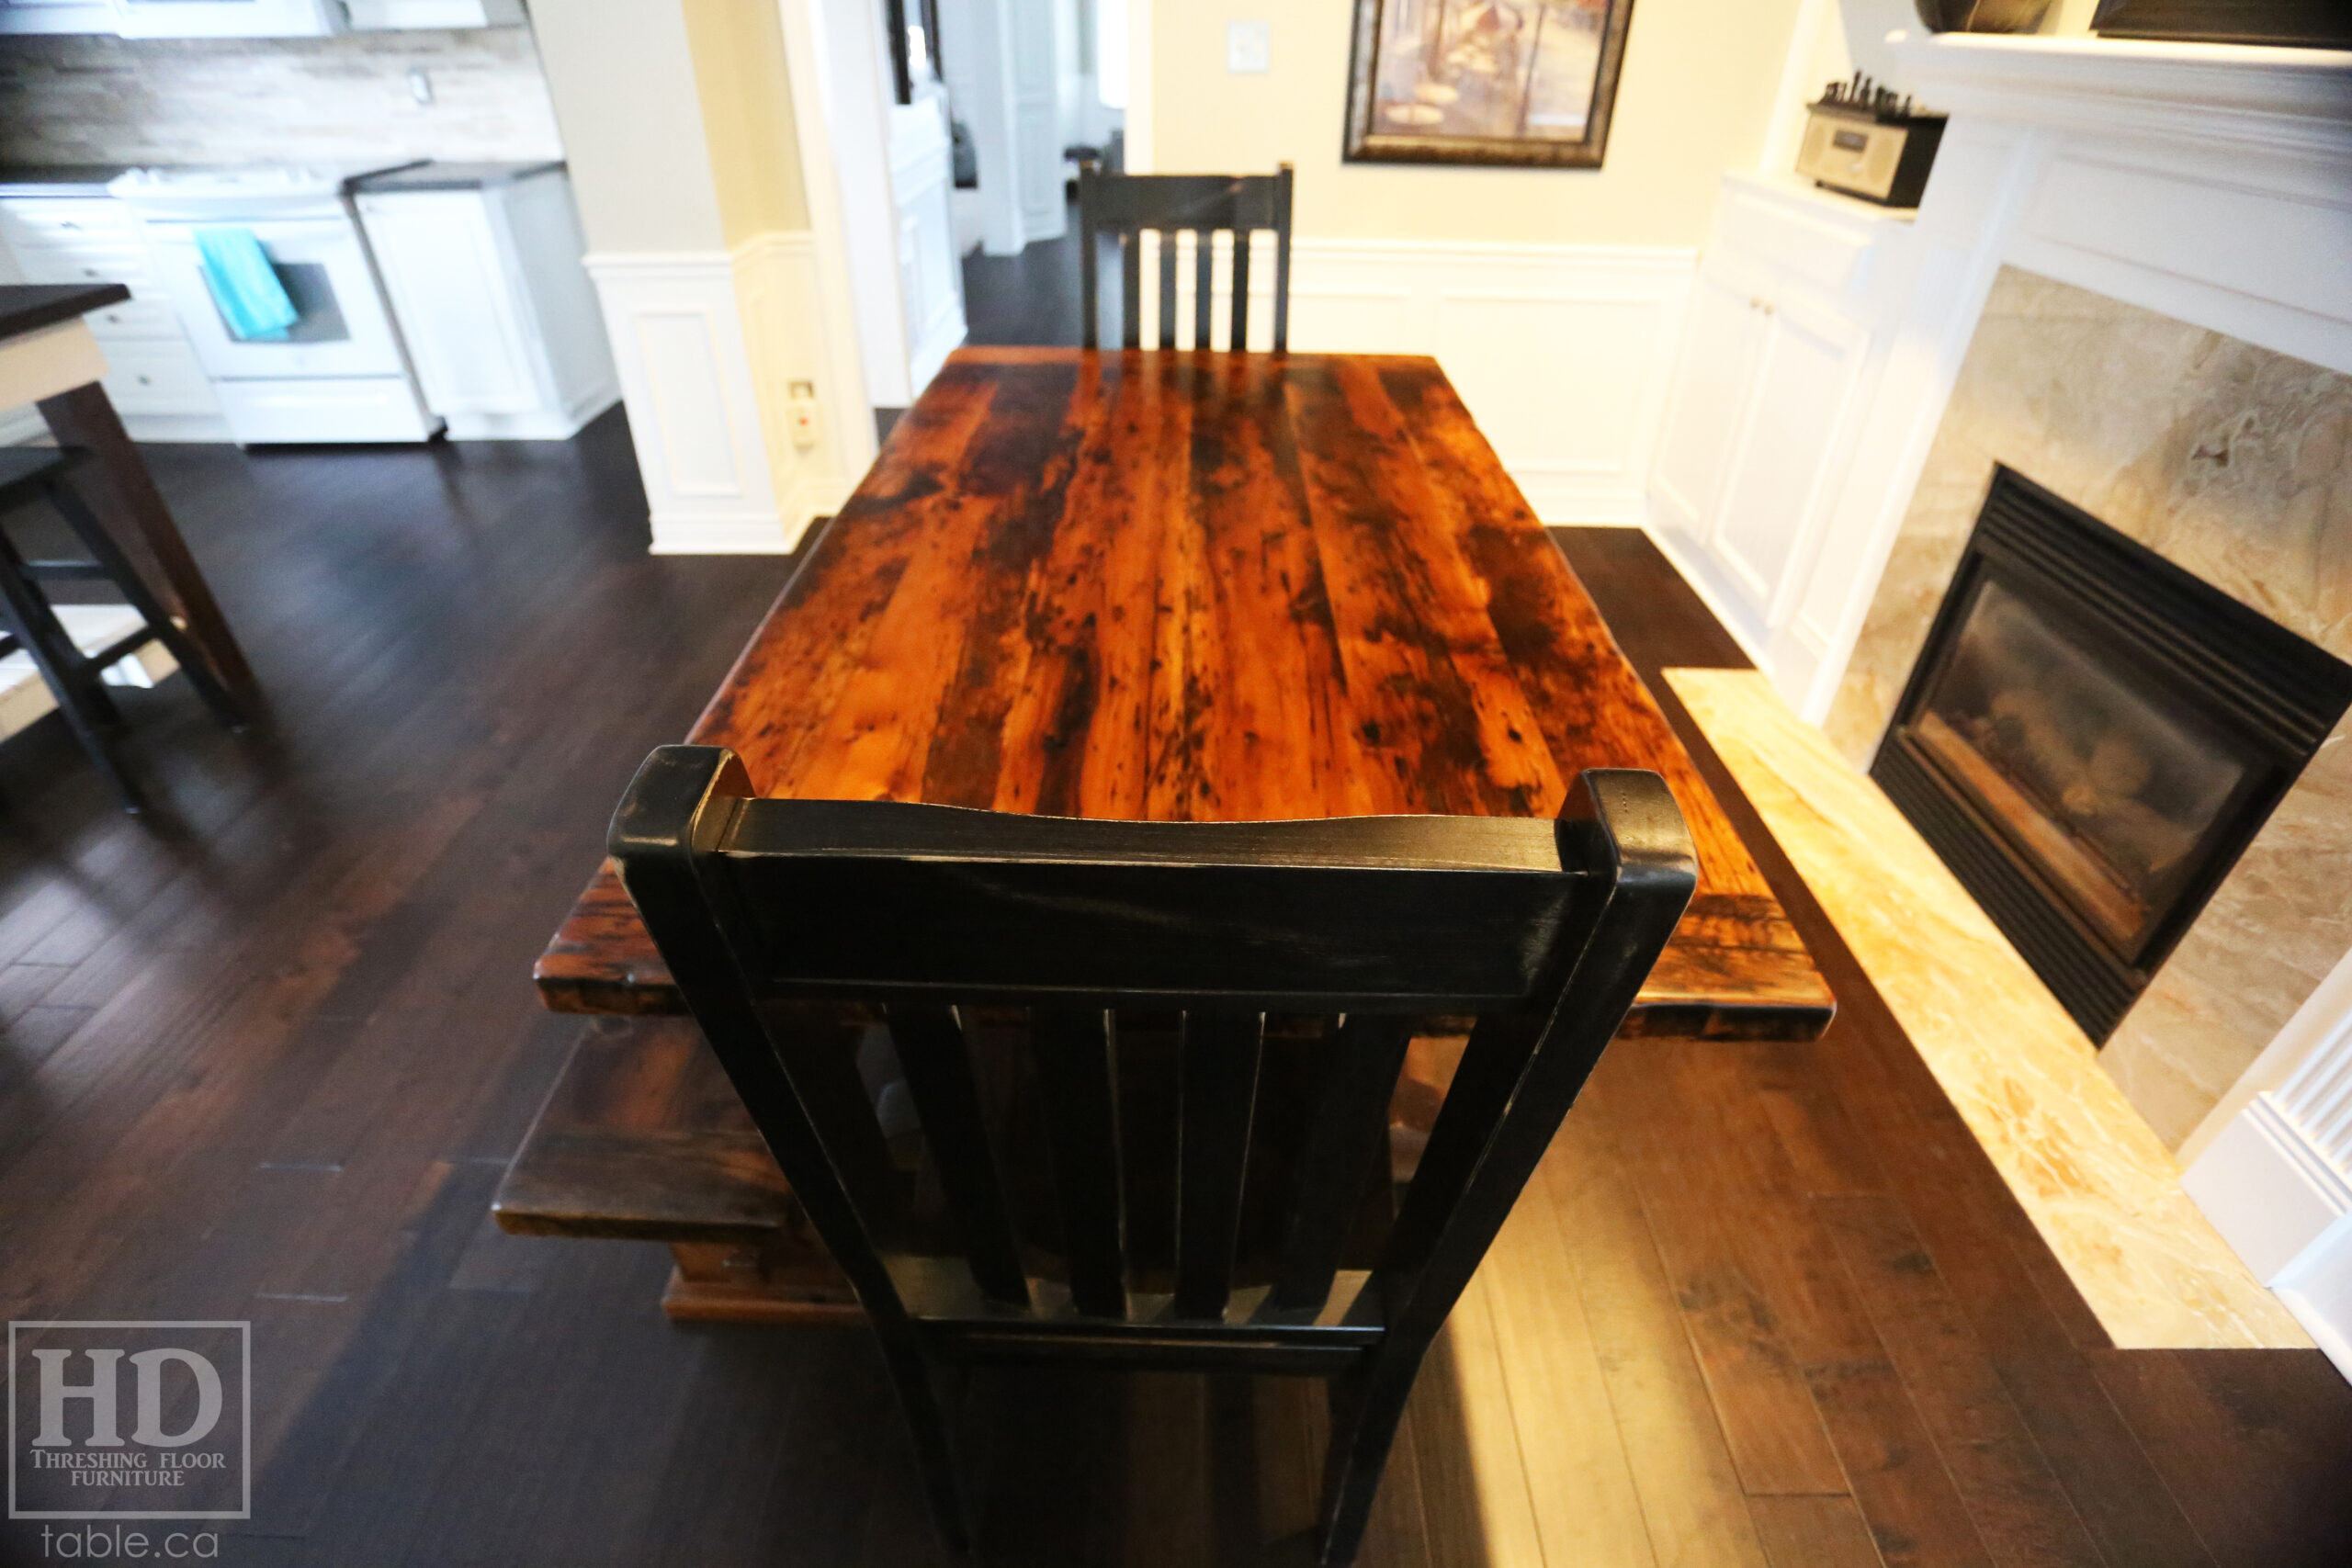 6' Ontario Barnwood Table we made for a Newmarket, Ontario Home - 40" wide - Trestle Base - 2" Hemlock Threshing Floor Construction - Original edges & distressing maintained - Premium epoxy + matte polyurethane finish - 6' [matching] reclaimed wood bench - 2 Strongback Chairs / Wormy Maple / Black with Sandthroughs Frame / Seat Stained Colour of Table / Matte polyurethane clearcoat finish - www.table.ca